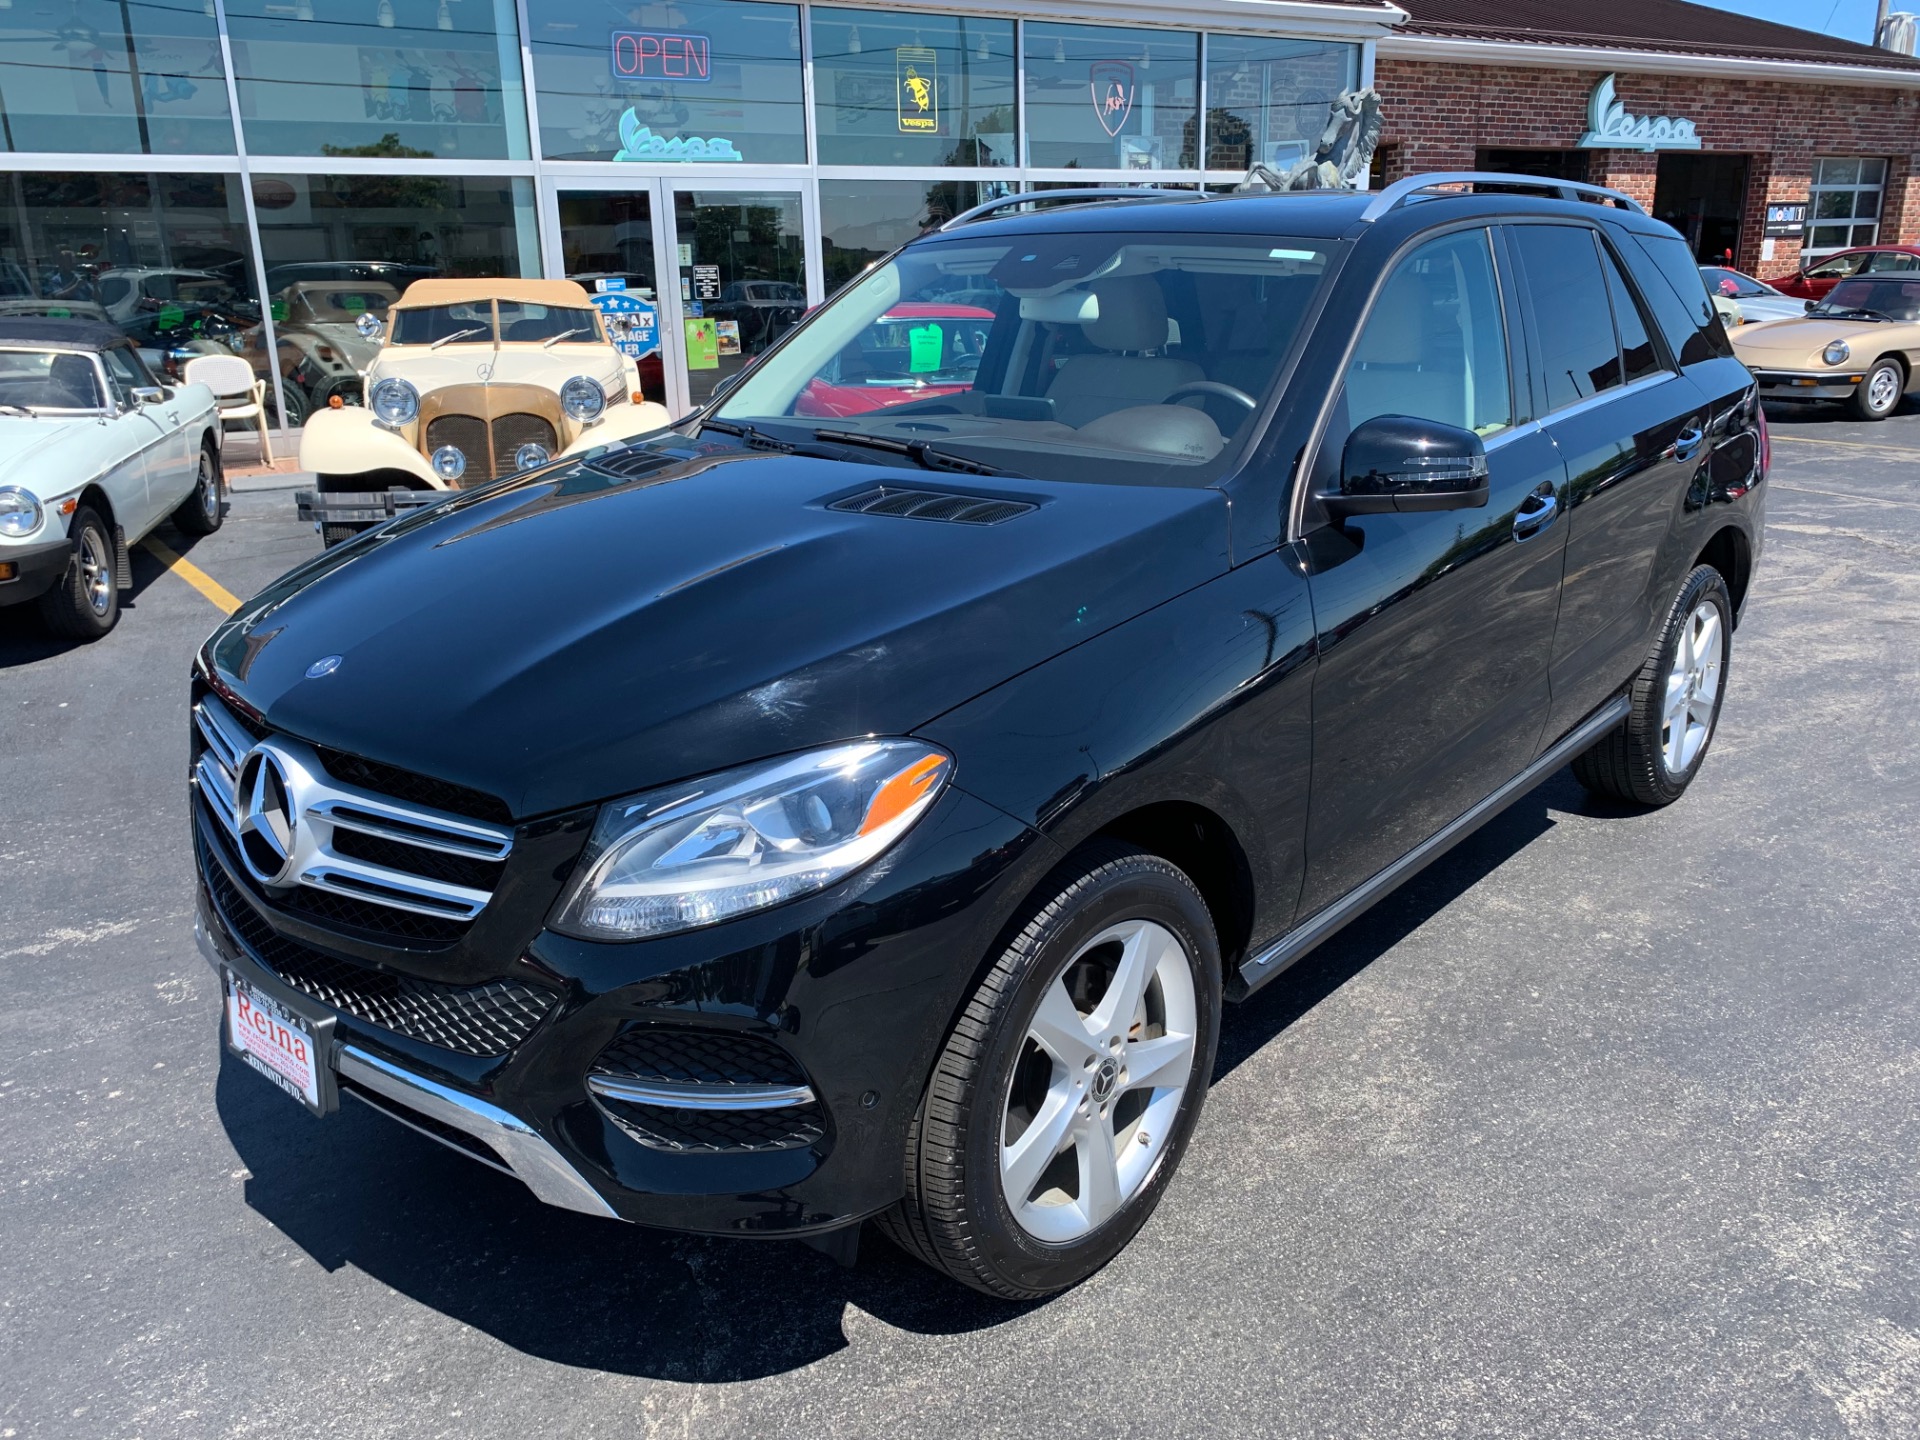 Used-2017-Mercedes-Benz-GLE-350-4MATIC